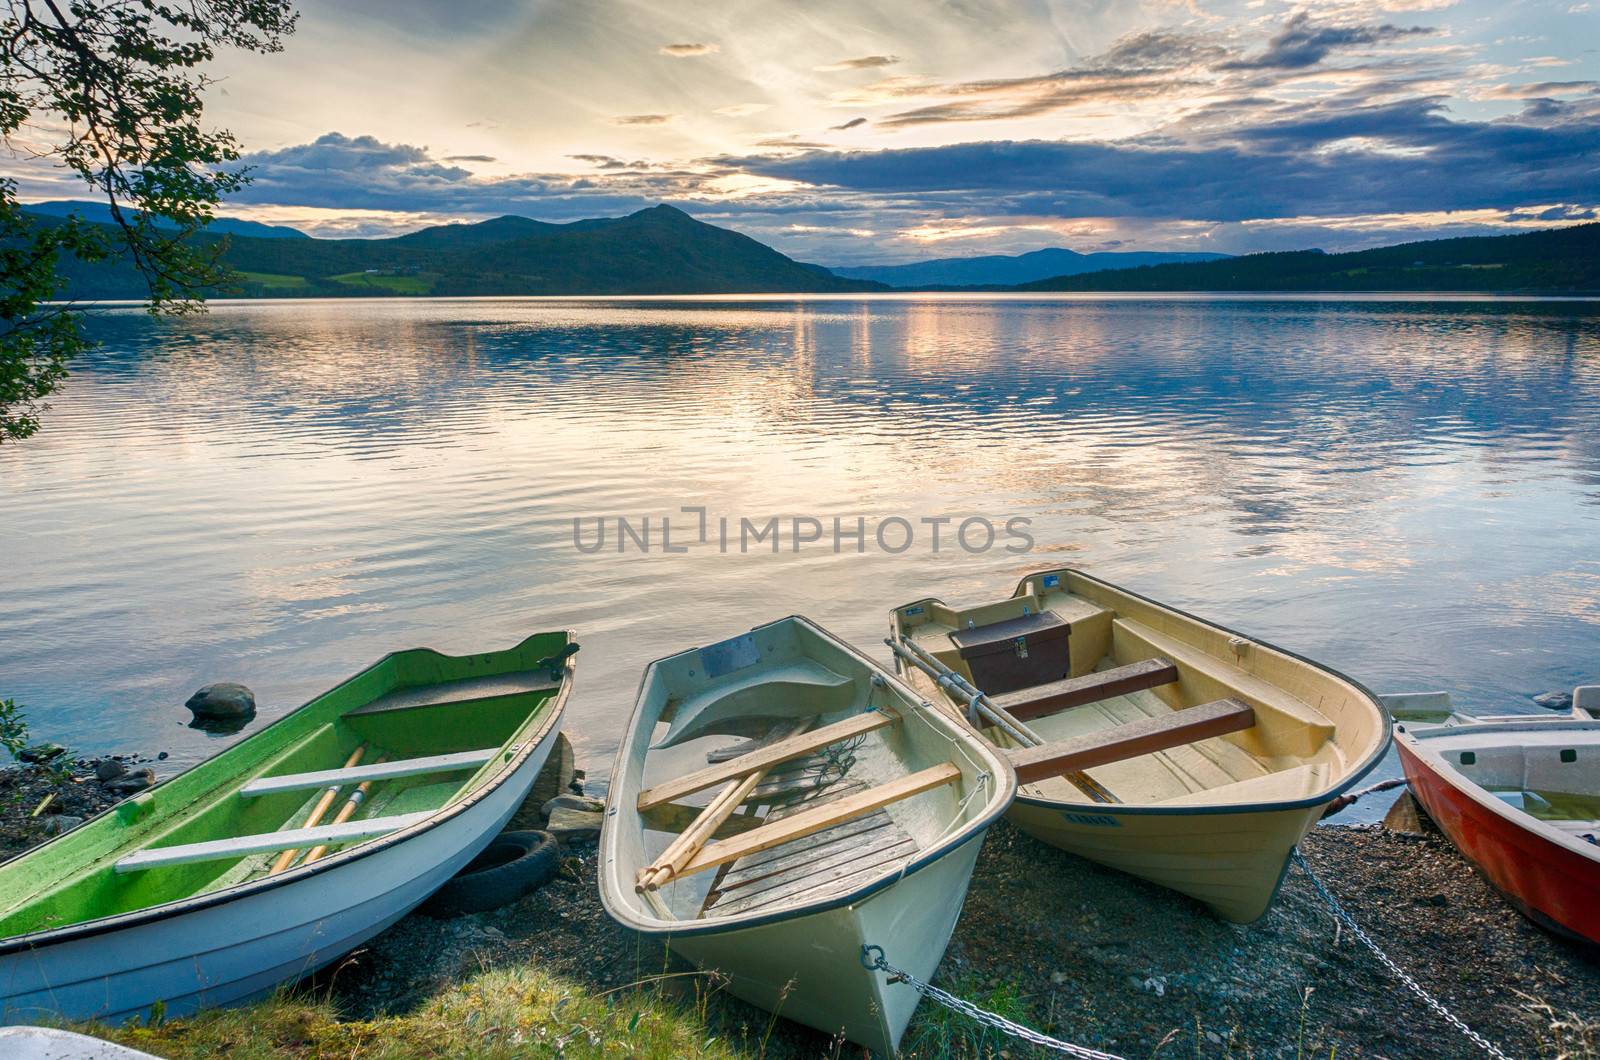 Boats and water in silence and romance Europe travel